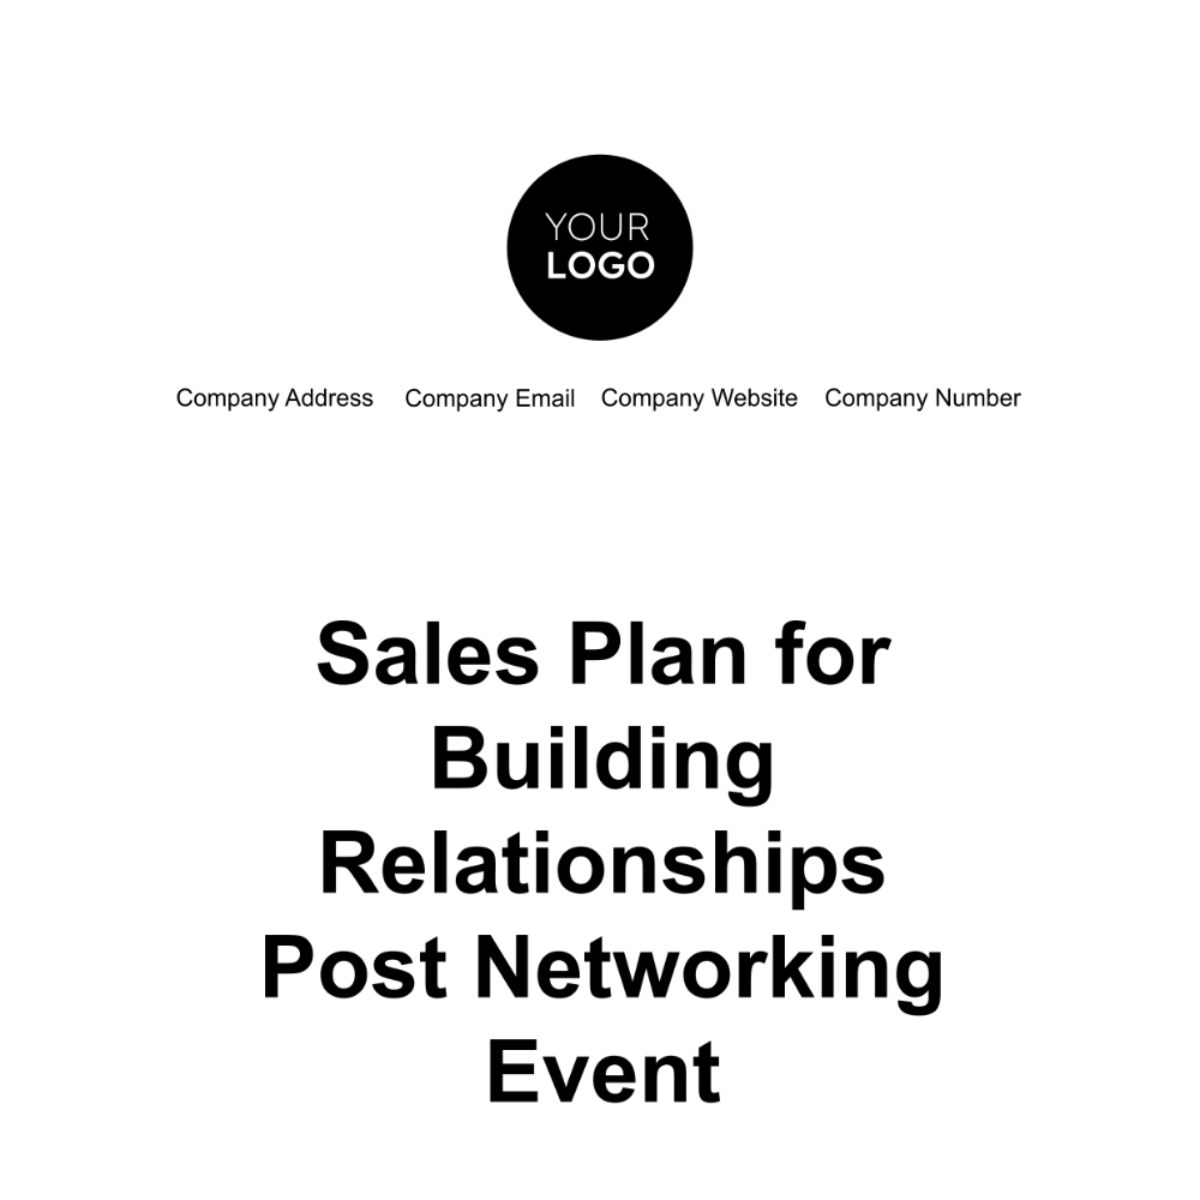 Free Sales Plan for Building Relationships Post Networking Event Template